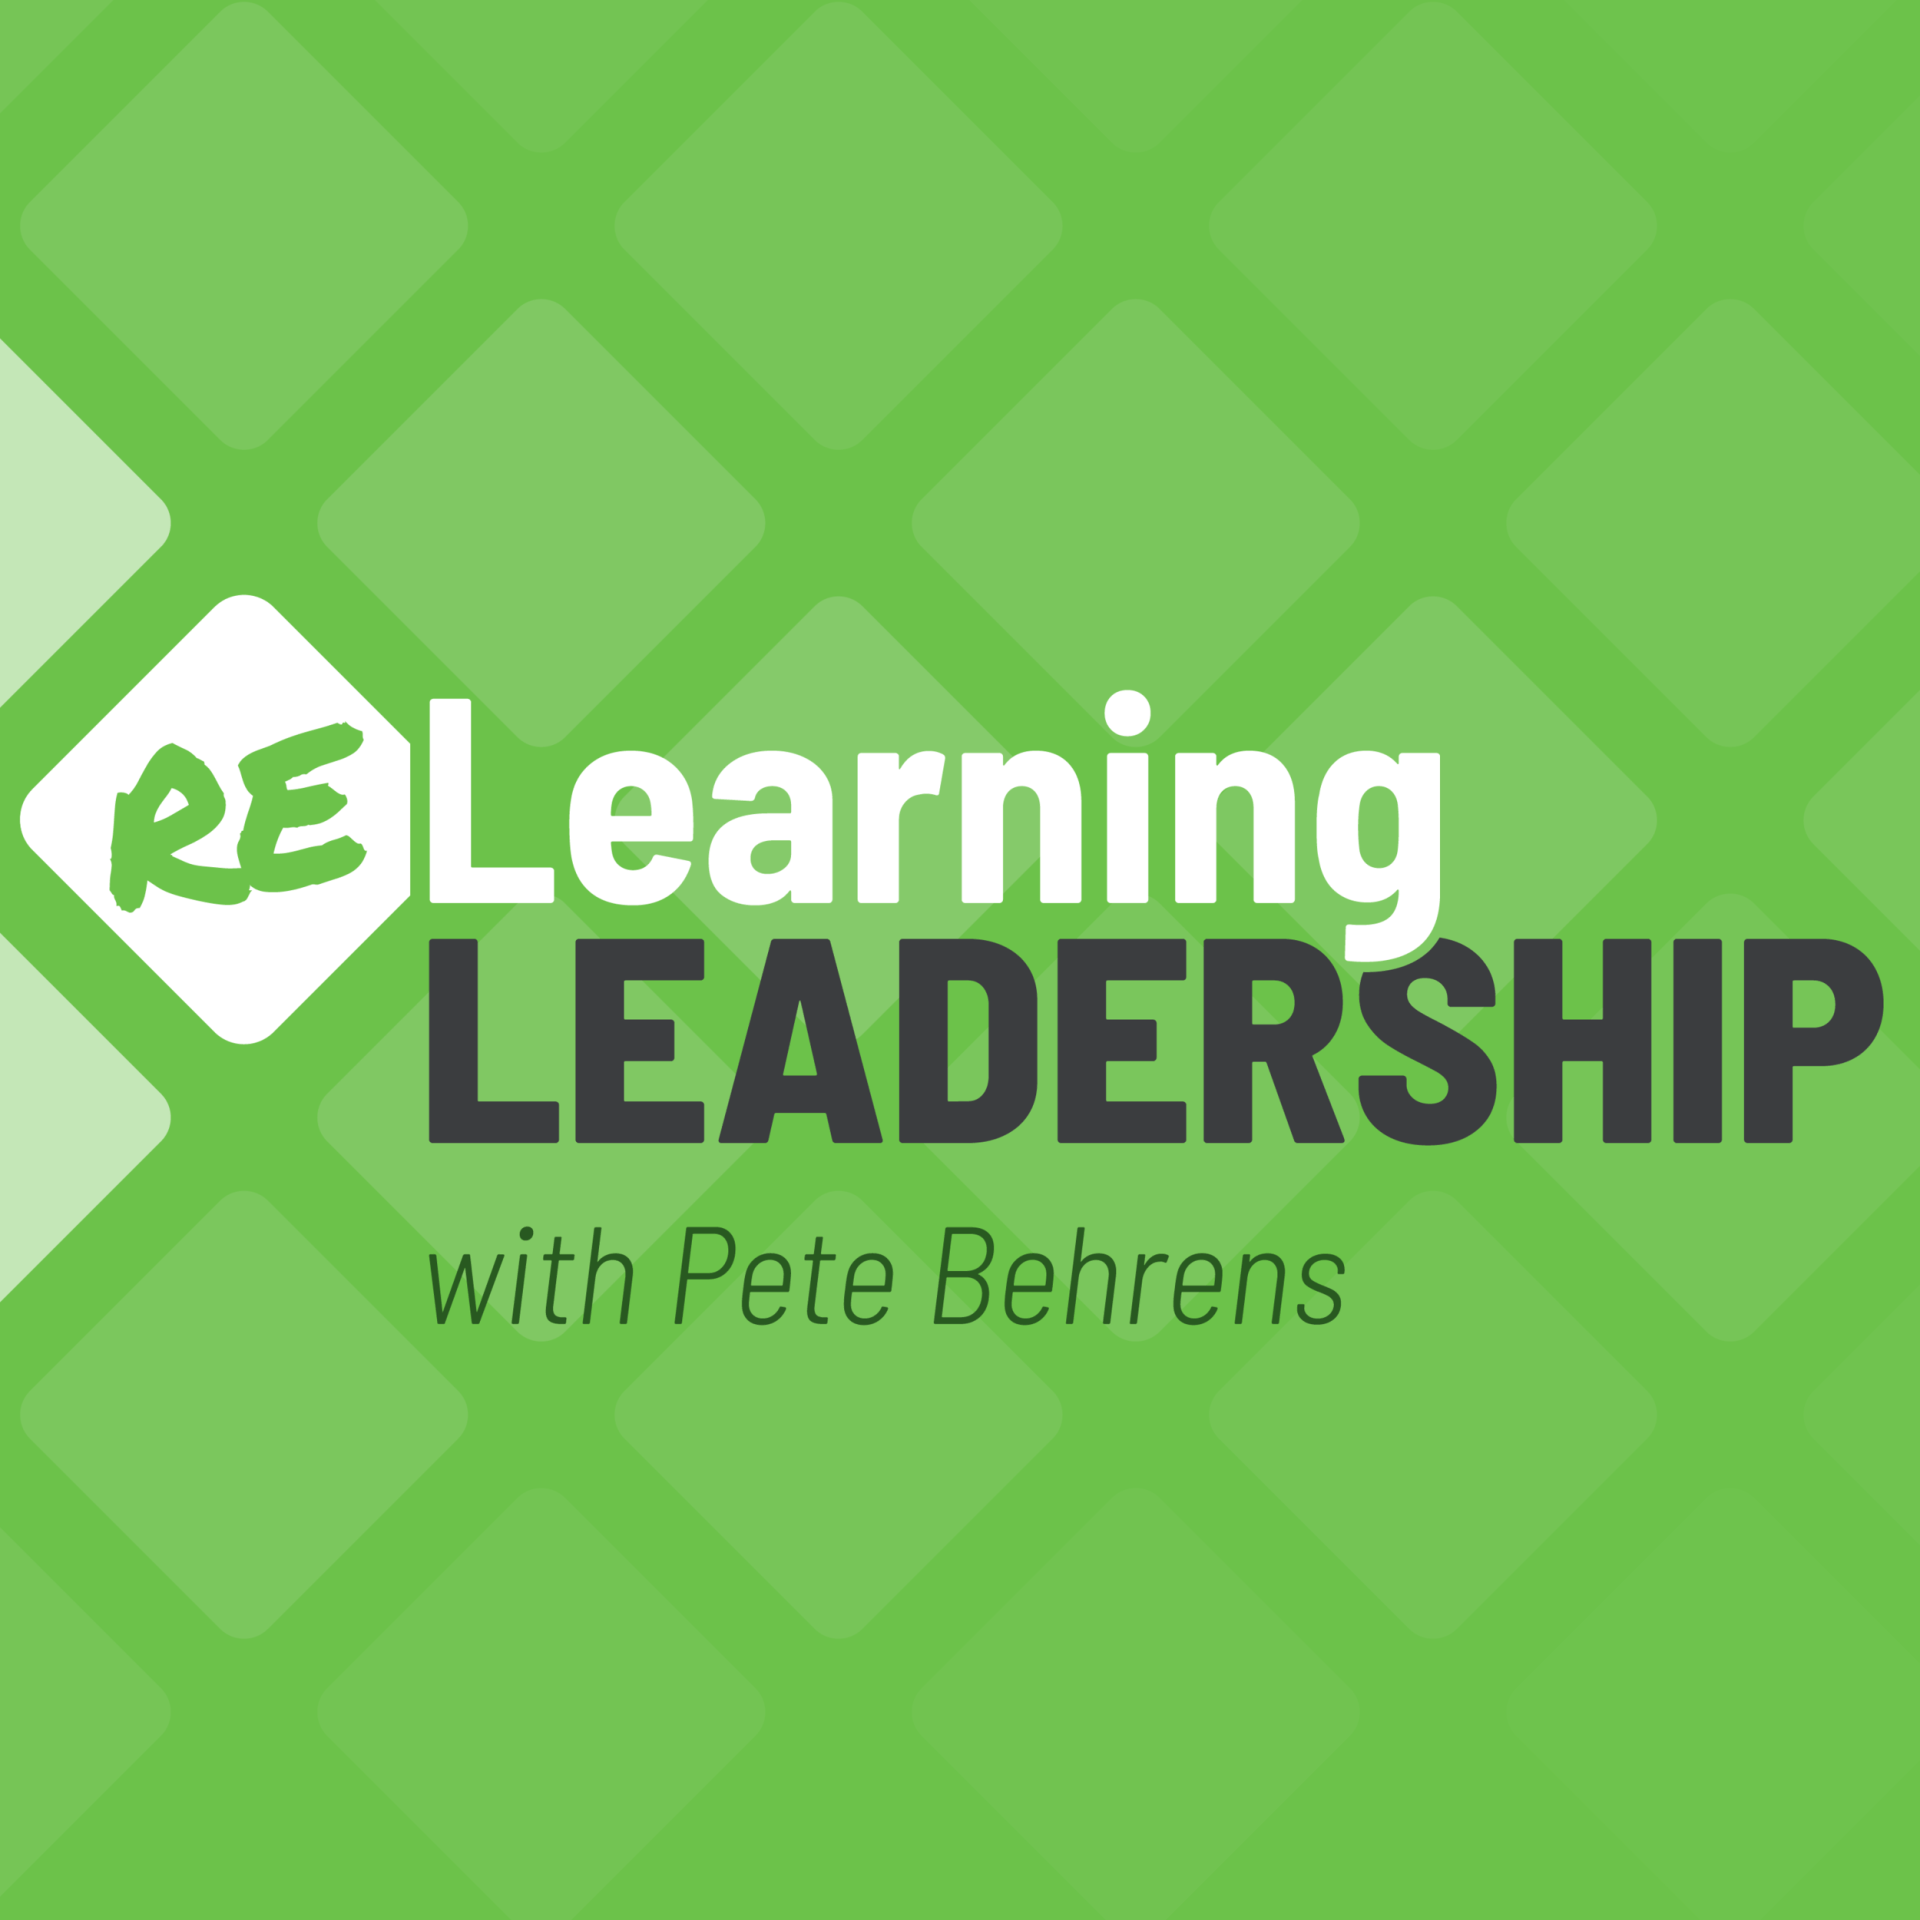 ReLearning Leadership Podcast logo on a green background